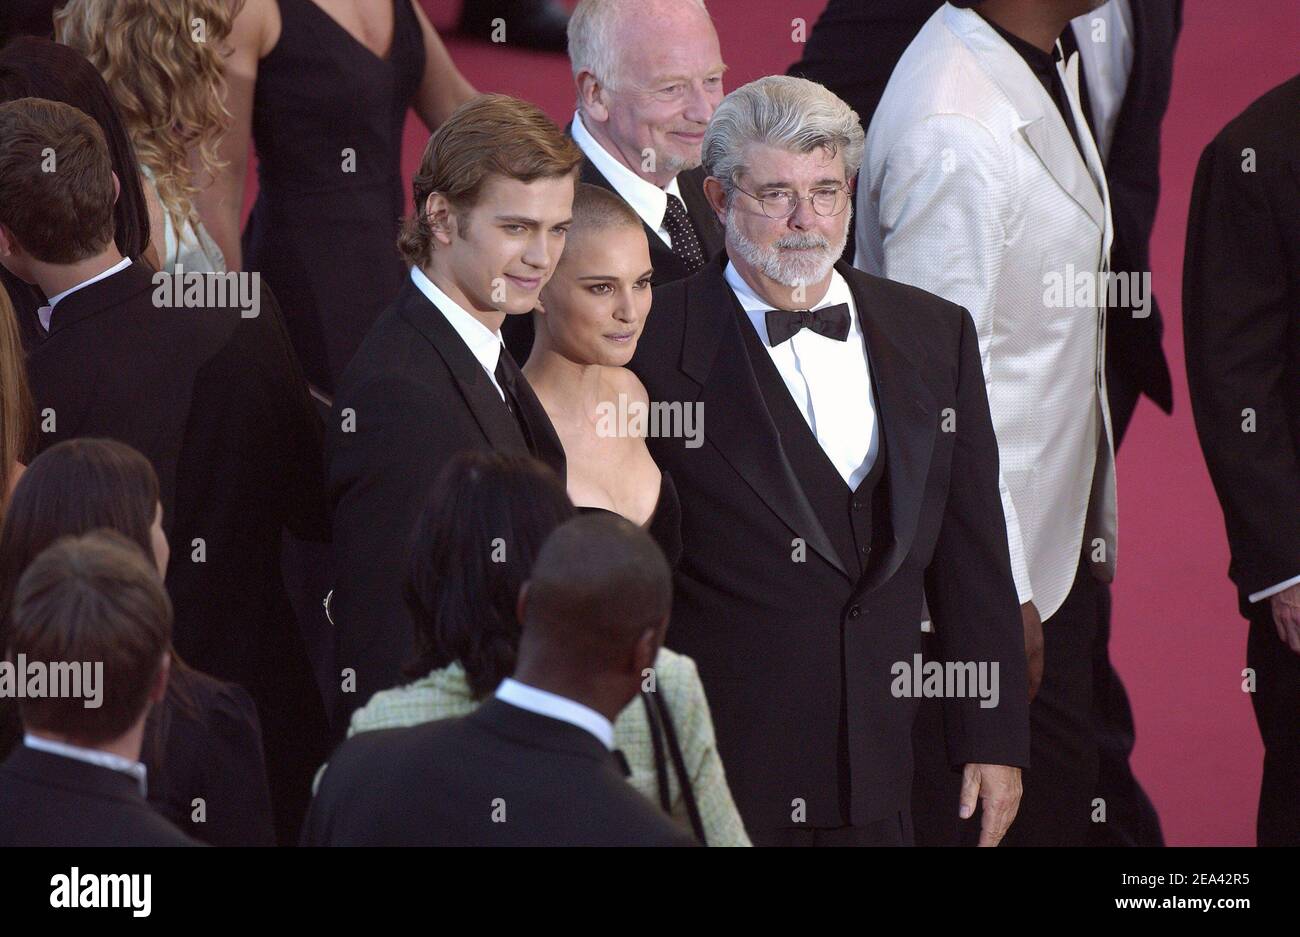 Cast members Natalie Portman and Hayden Christensen with director George Lucas arrive for George Lucas film 'Star Wars Episode 3 Revenge of the Sith' World Premiere presented out of competition at the 58th Cannes Film Festival in Cannes, France on May 15, 2005. Photo by Hahn-Nebinger-Klein/ABACA Stock Photo